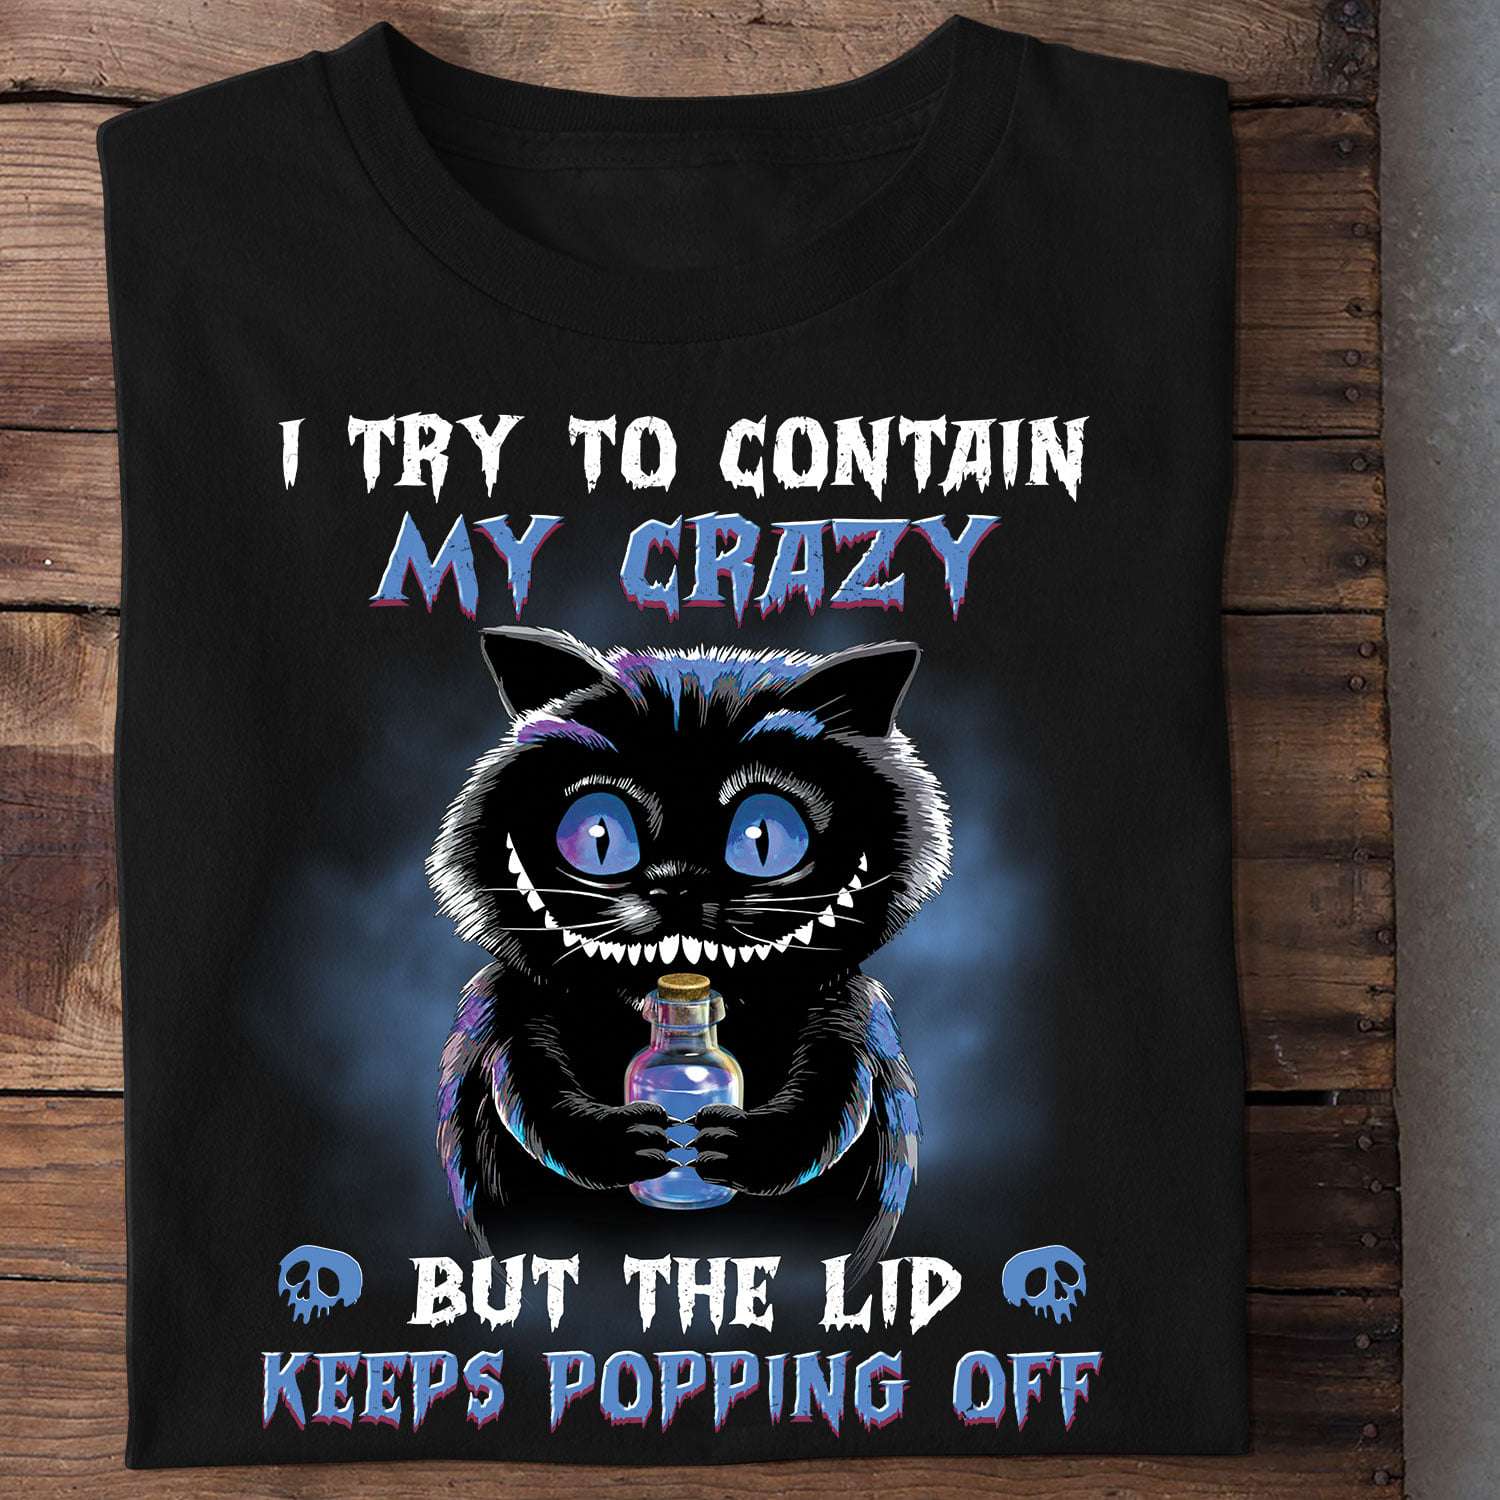 I try to contain my crazy but the lid keeps poppin off - Chesire cat, crazy liquid bottle